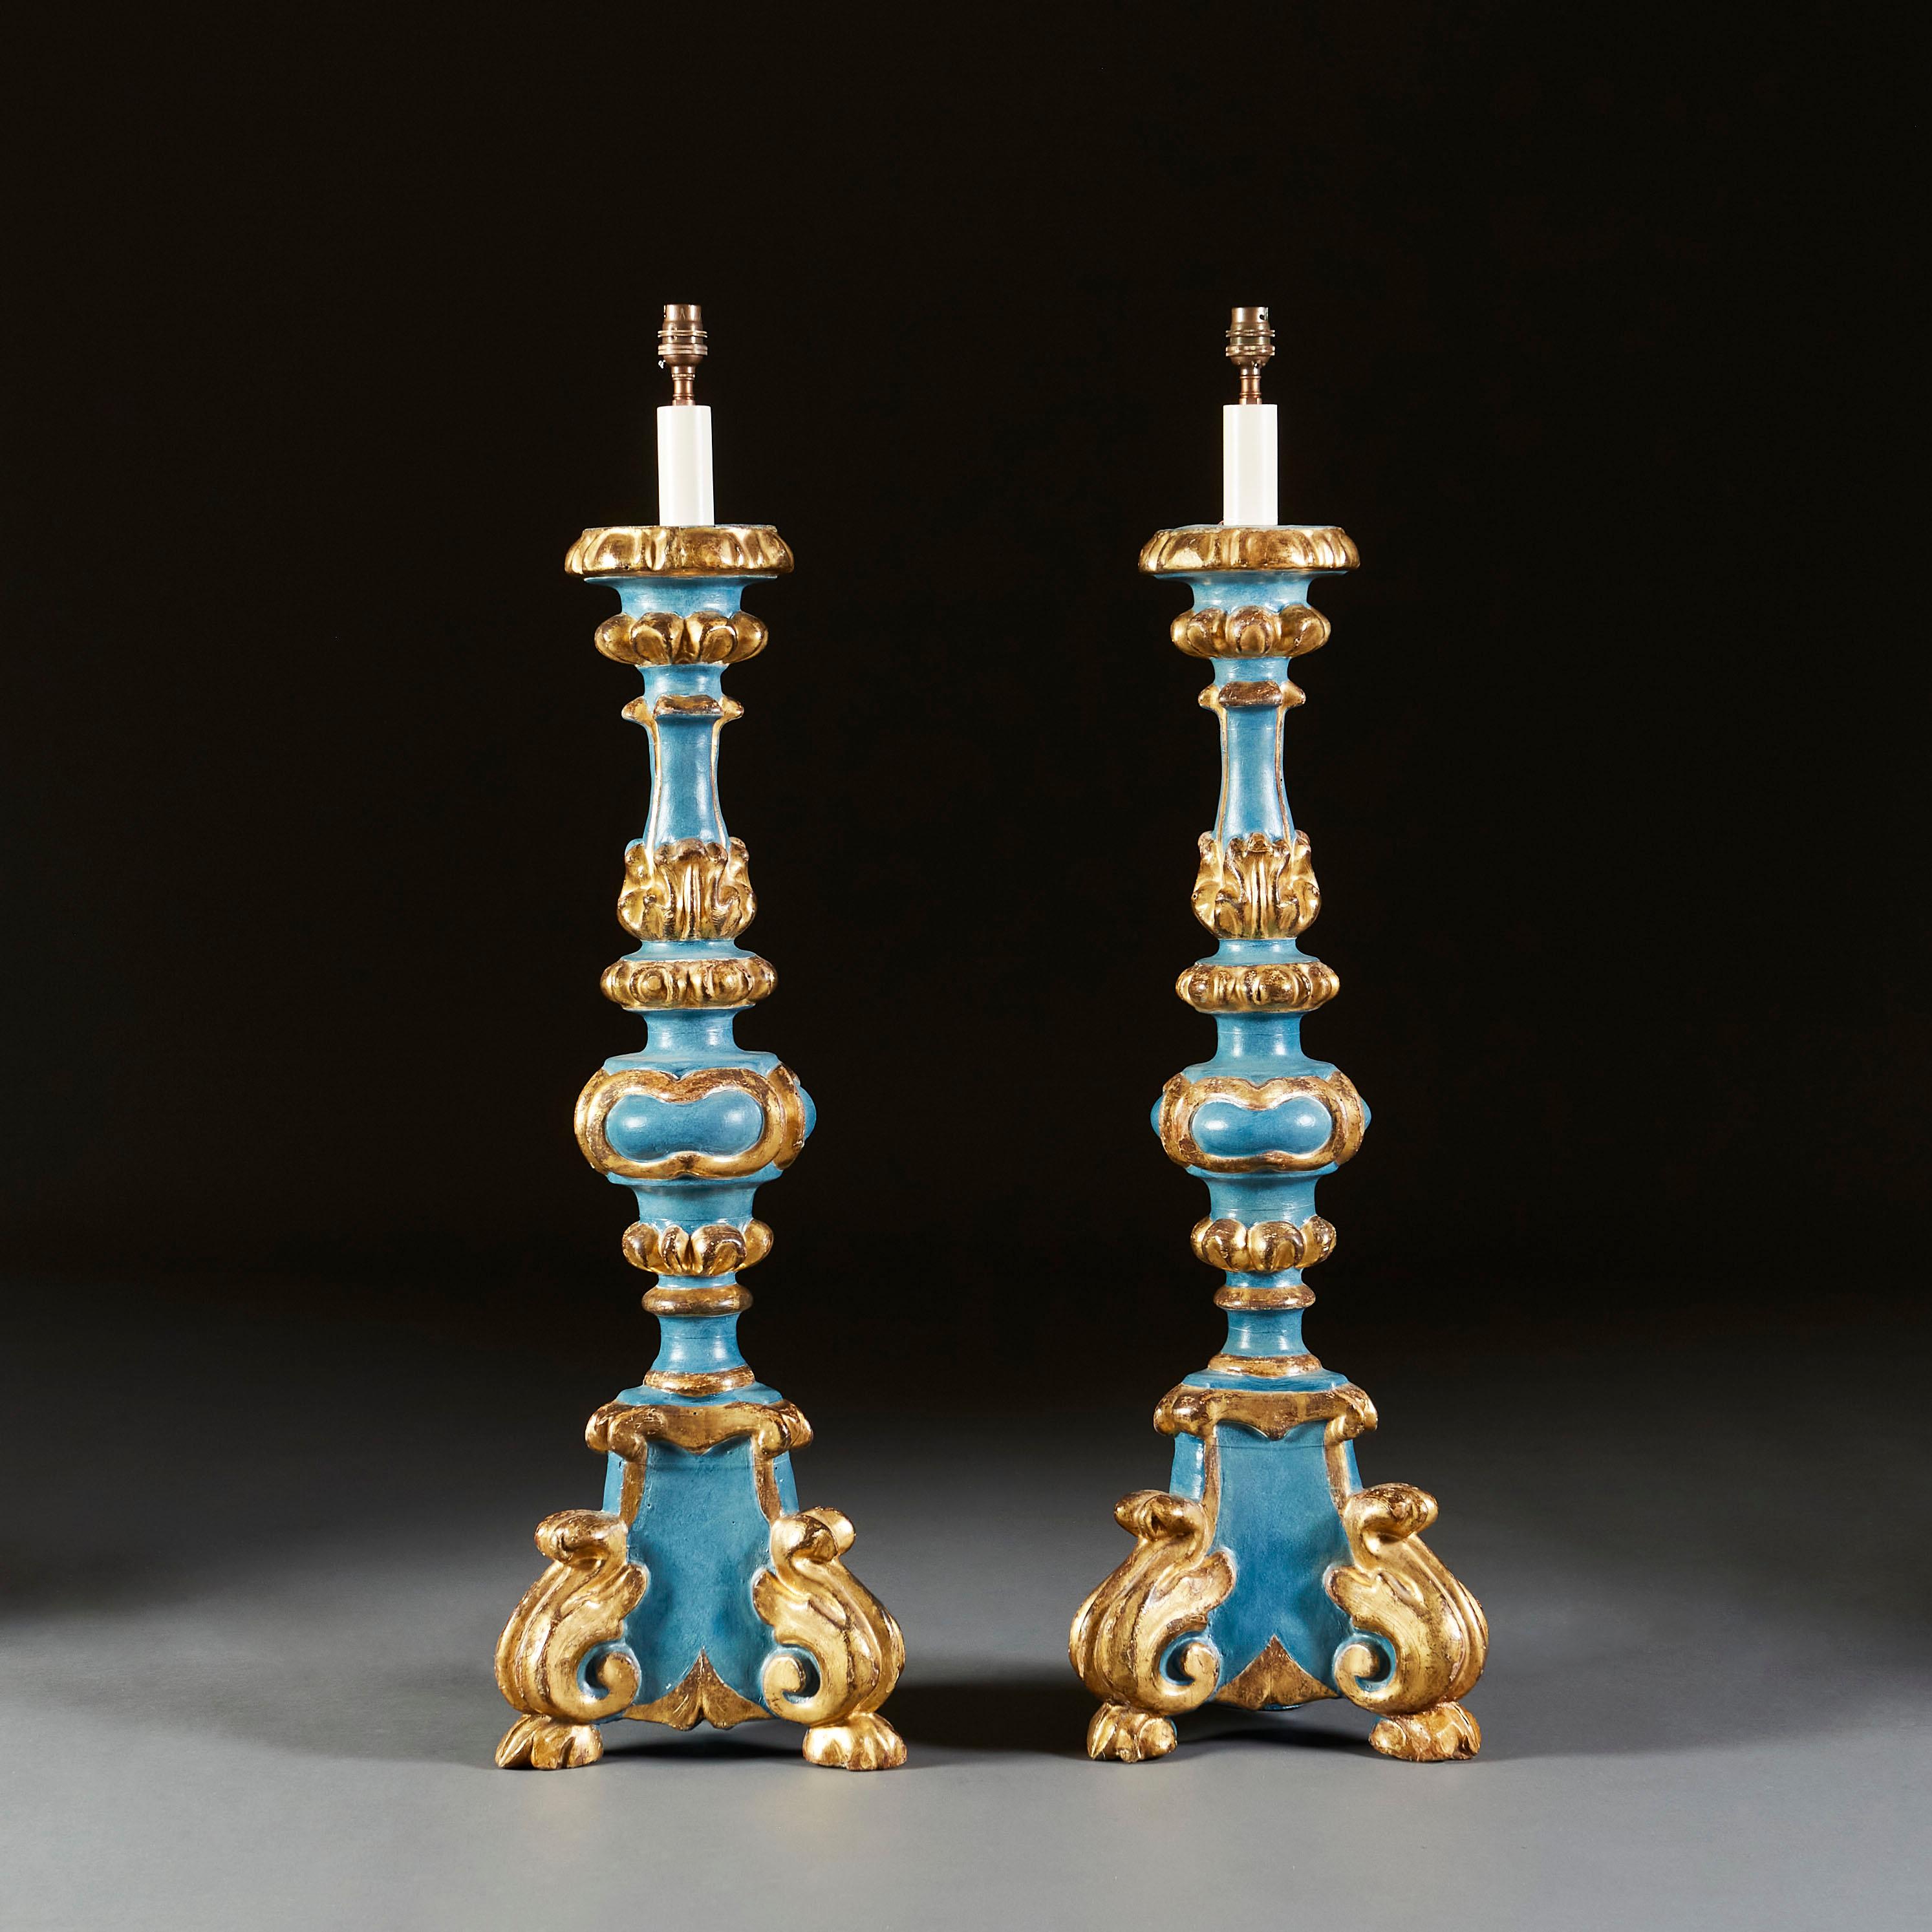 A pair of early twentieth century Italian candlesticks of large scale, with blue painted ground overlaid with carved and gilt decoration, supported on tripod bases with acanthus leaf scrolling feet.

Currently wired for the UK with twisted bronze